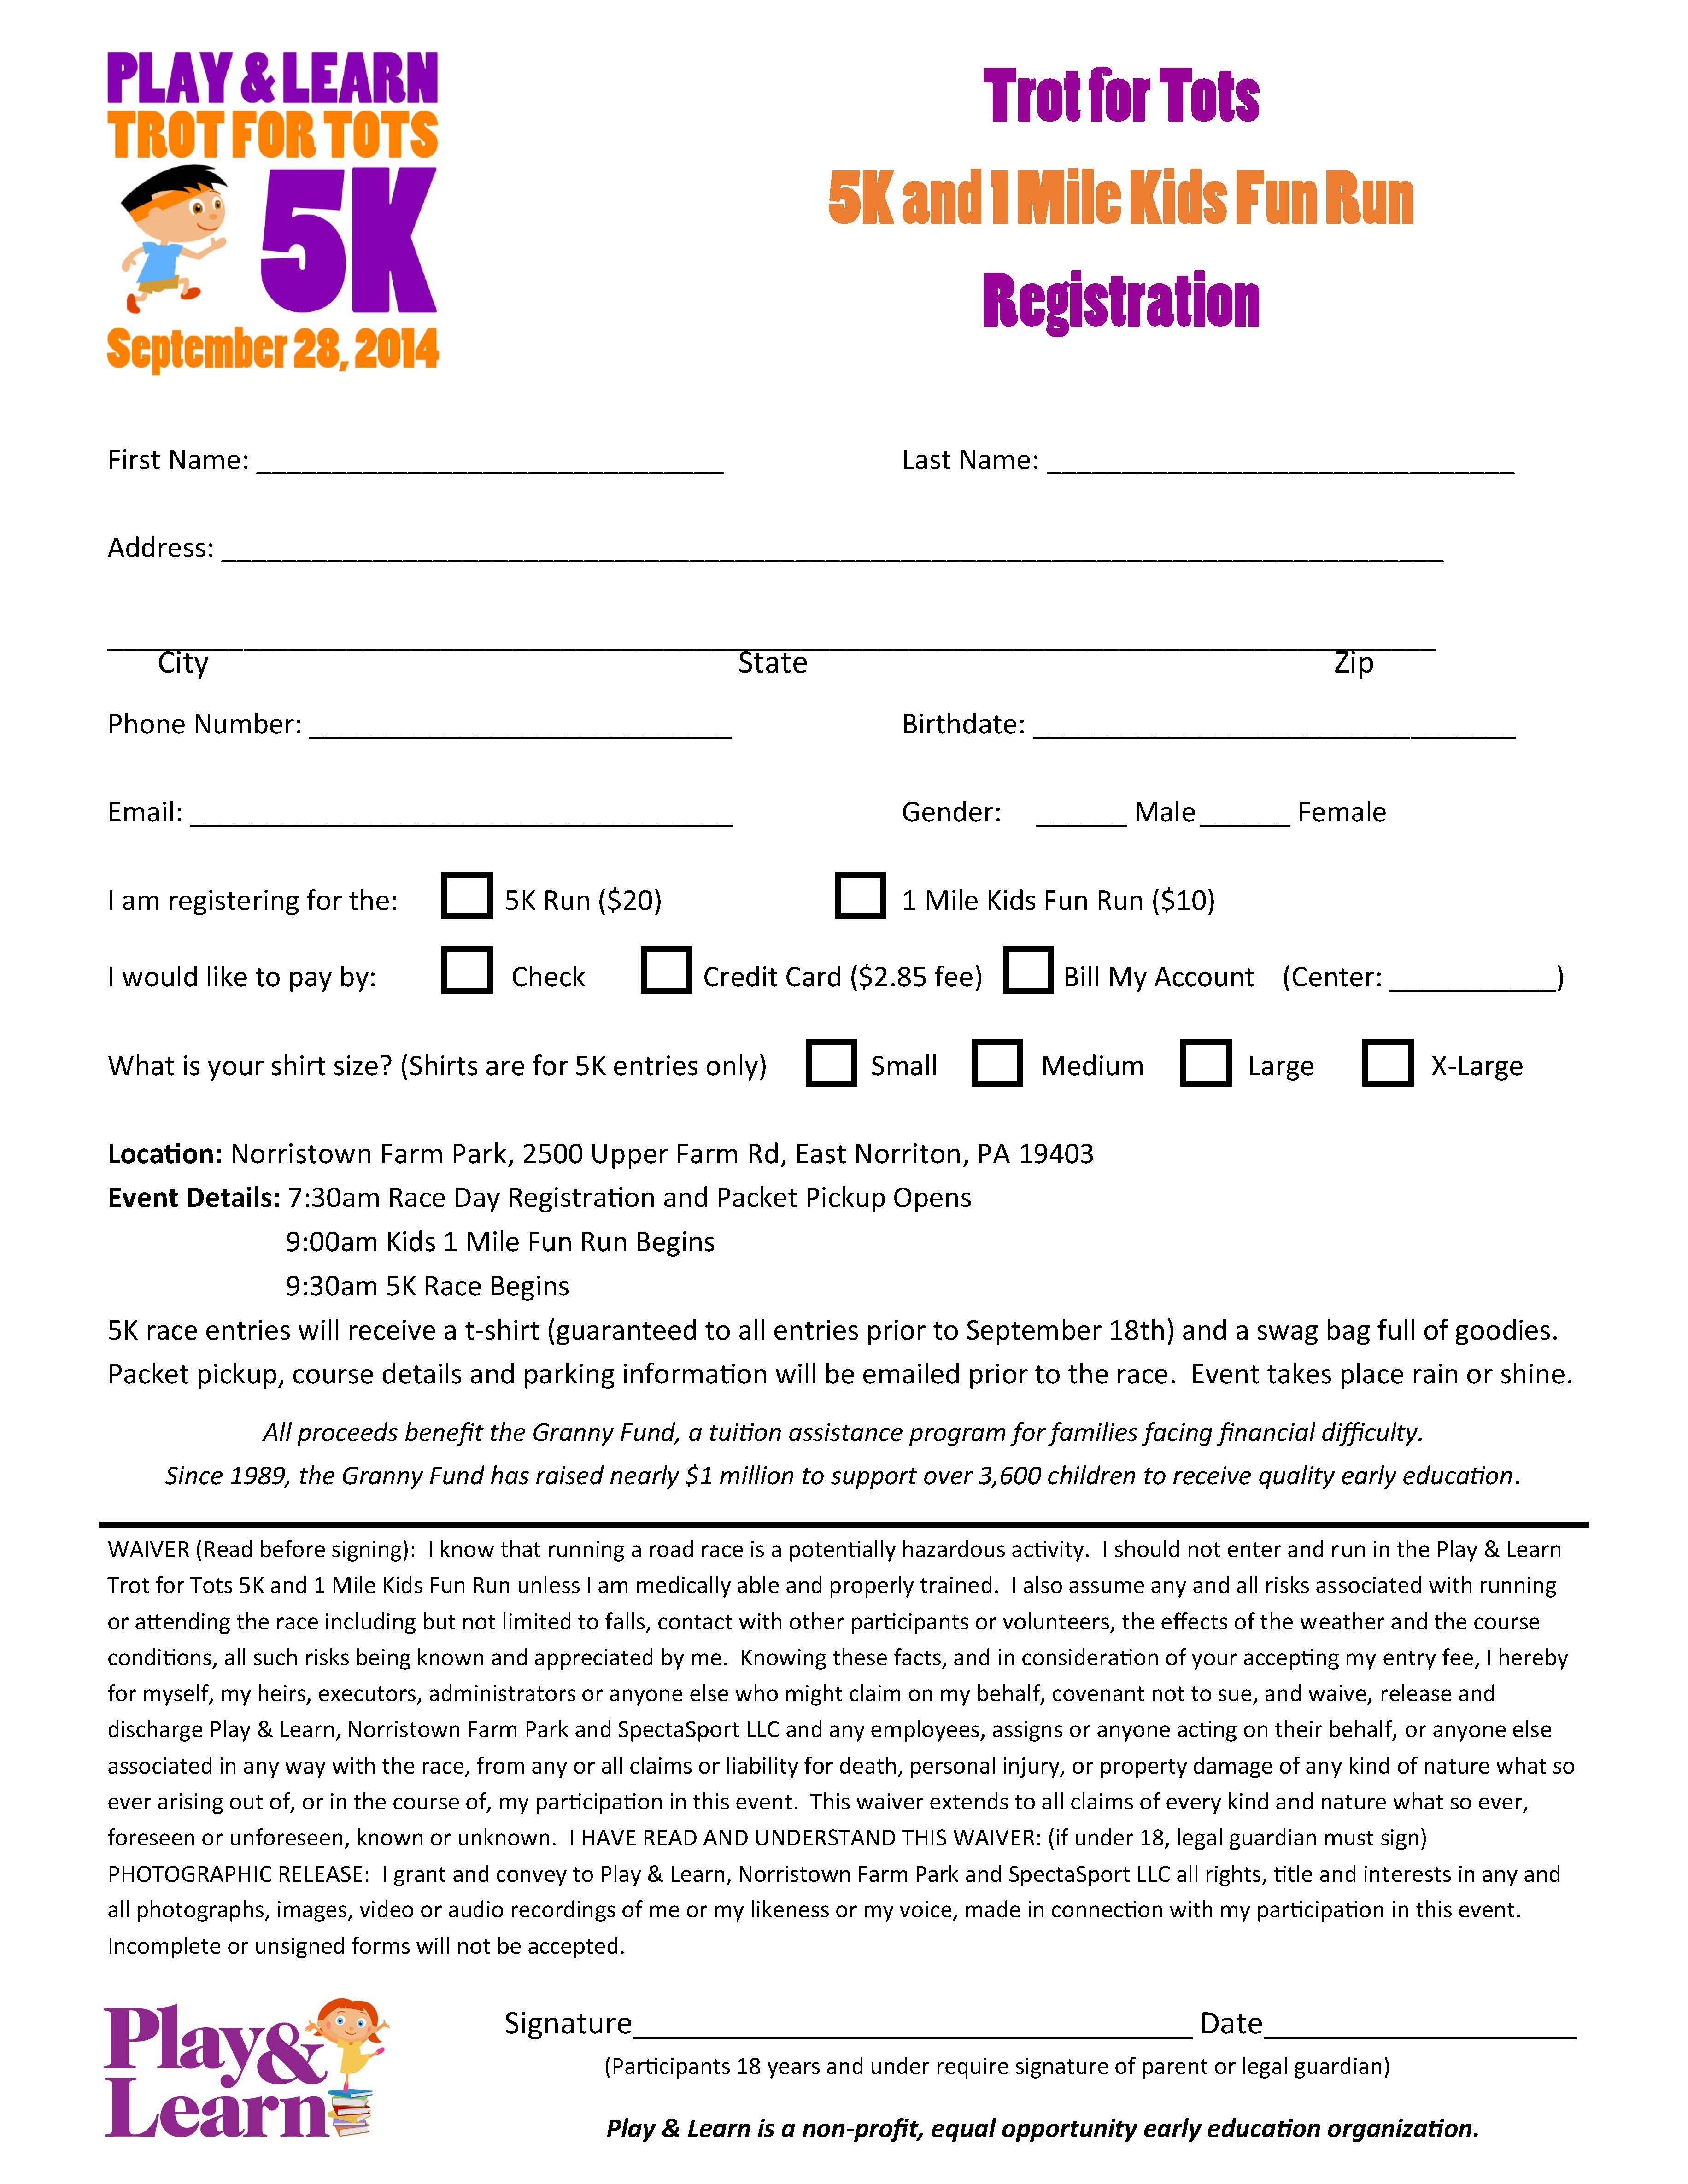 Registration Form for Play & Learns 5k and Kids Fun Run